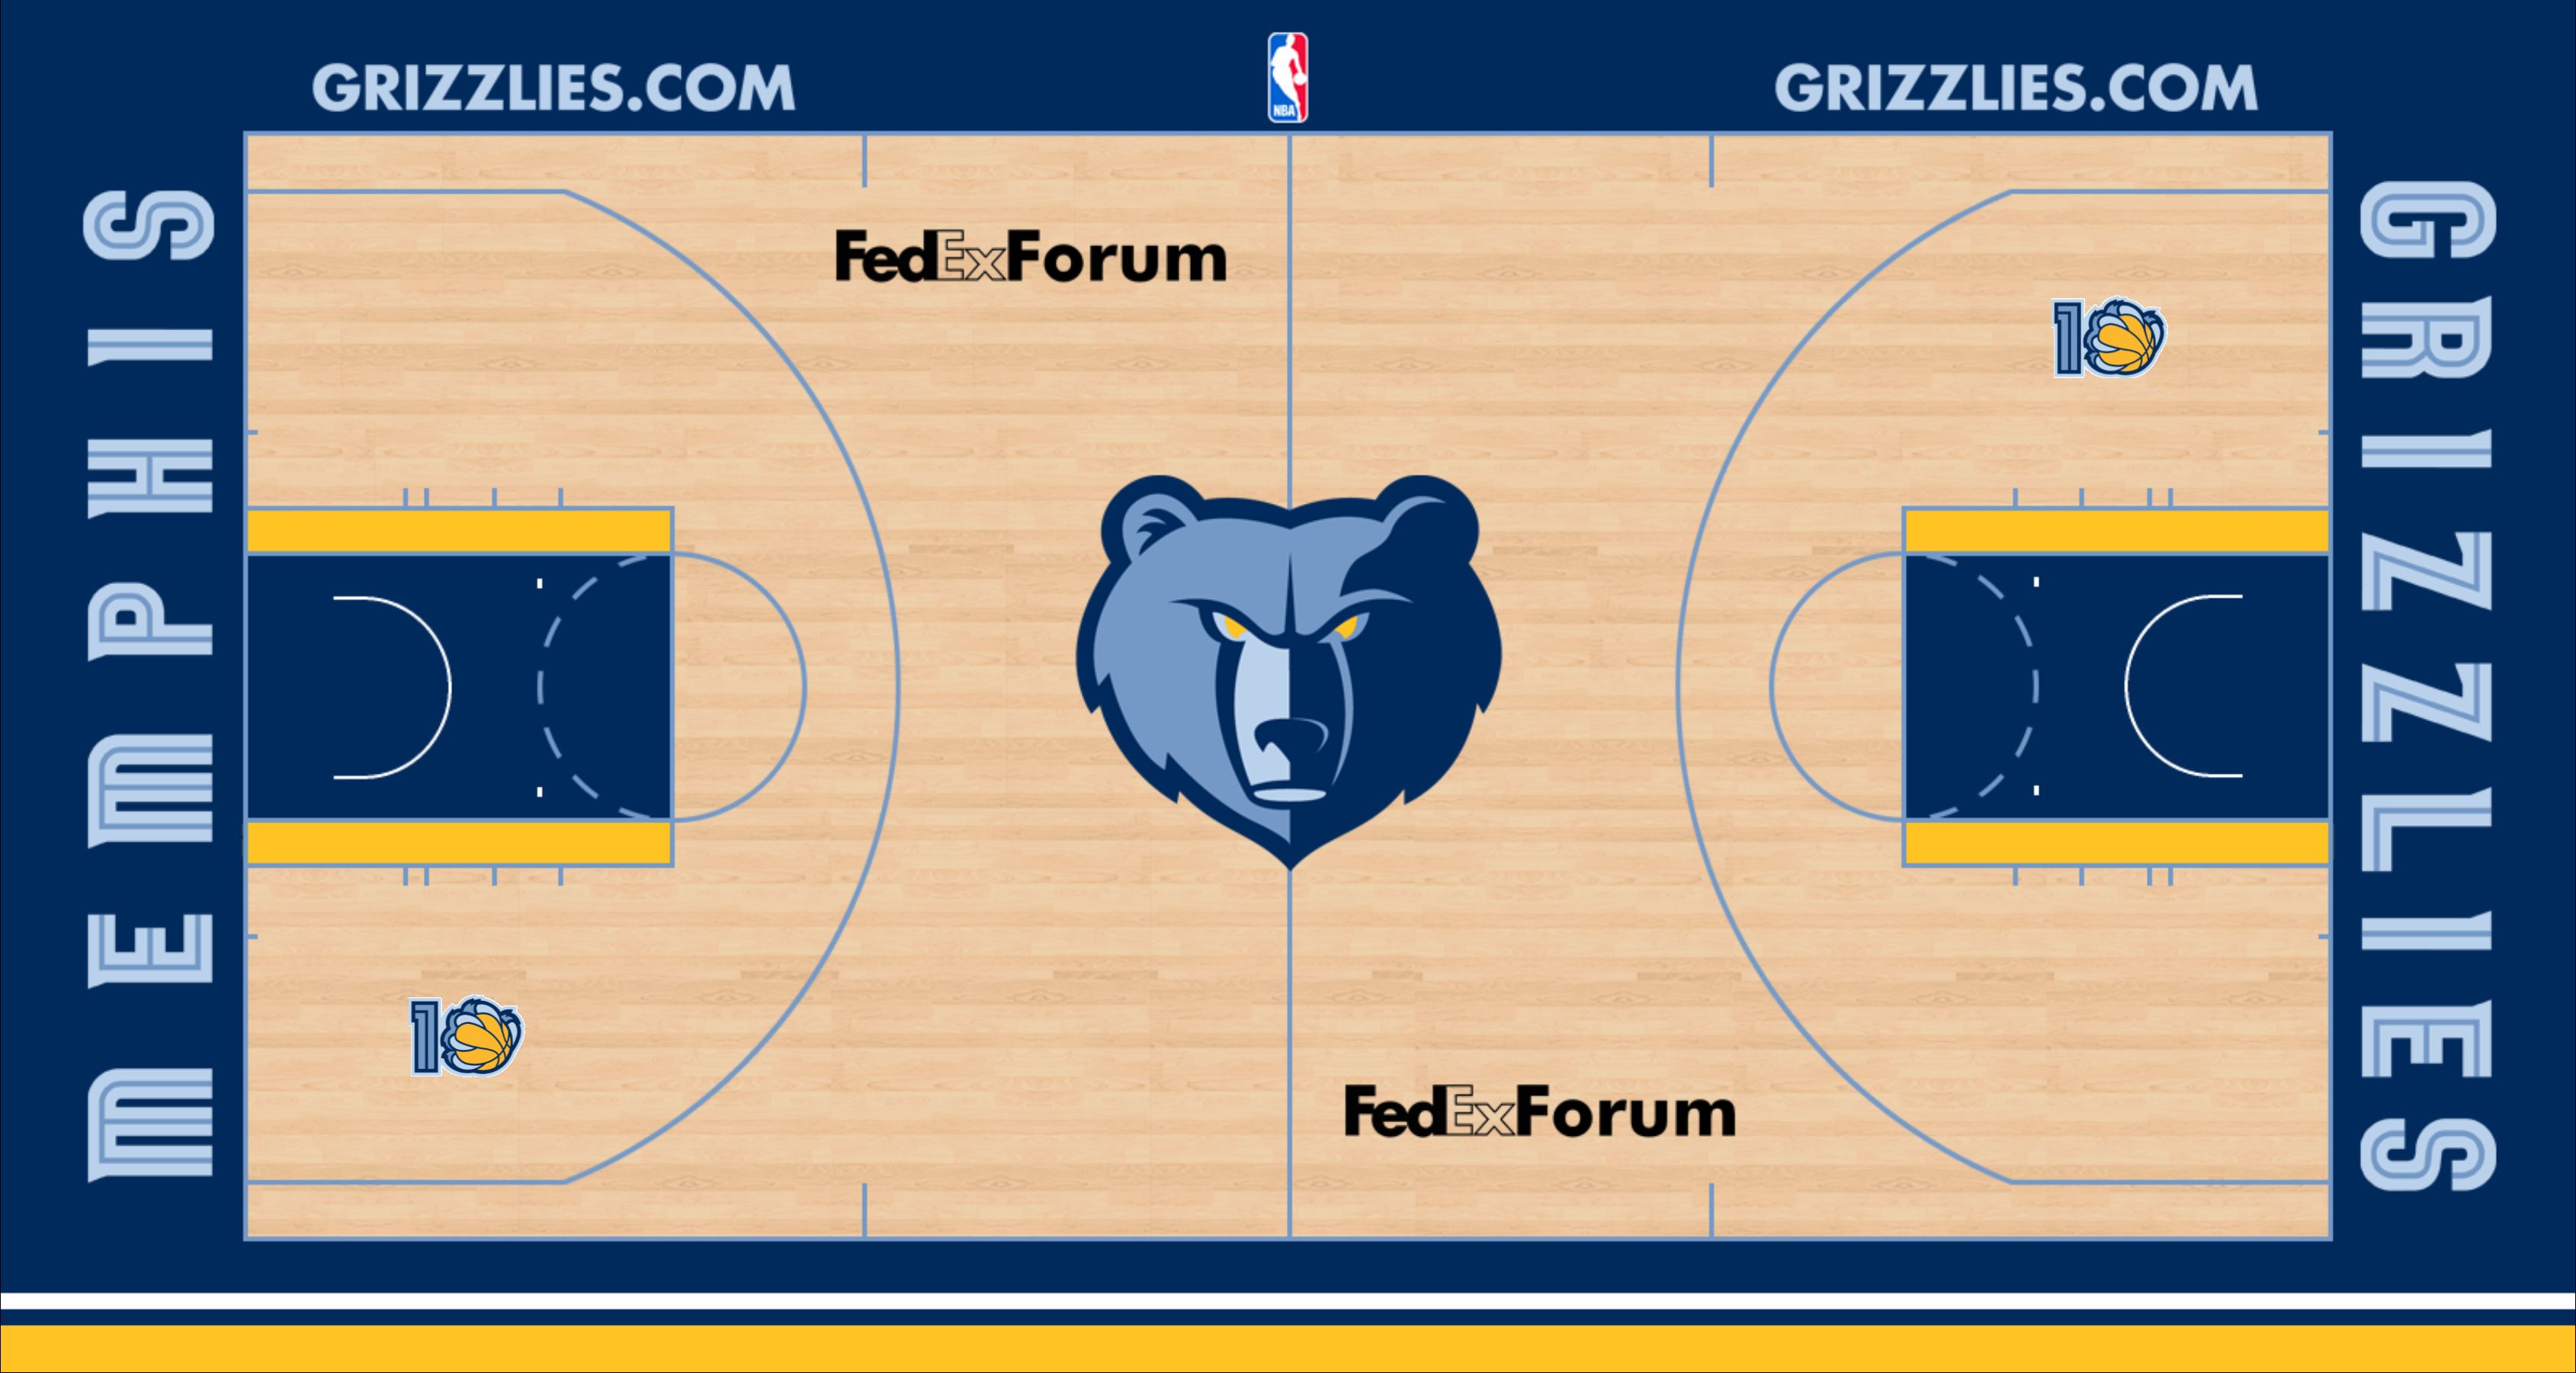 1920x1080  1920x1080 background grizzly bear memphis grizzlies nba  basketball logo blue  Coolwallpapersme